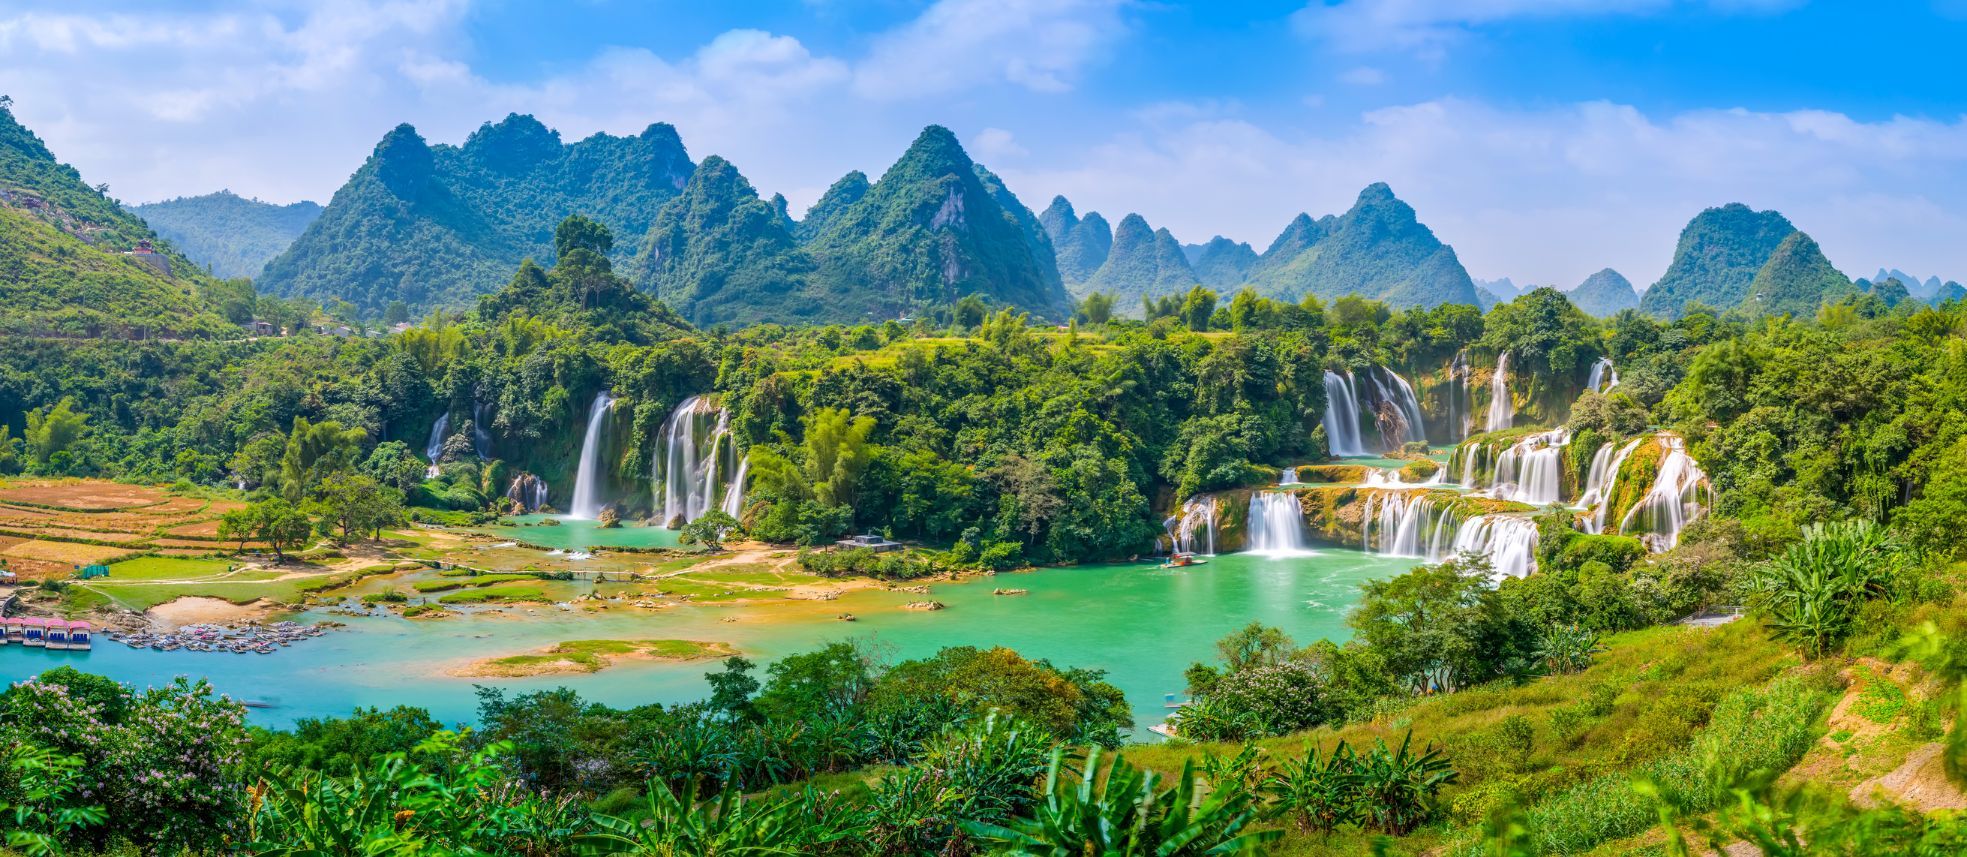 The Guangxi Chinese Detian cross-border waterfalls, surrounded by dense jungle. Photo: Getty